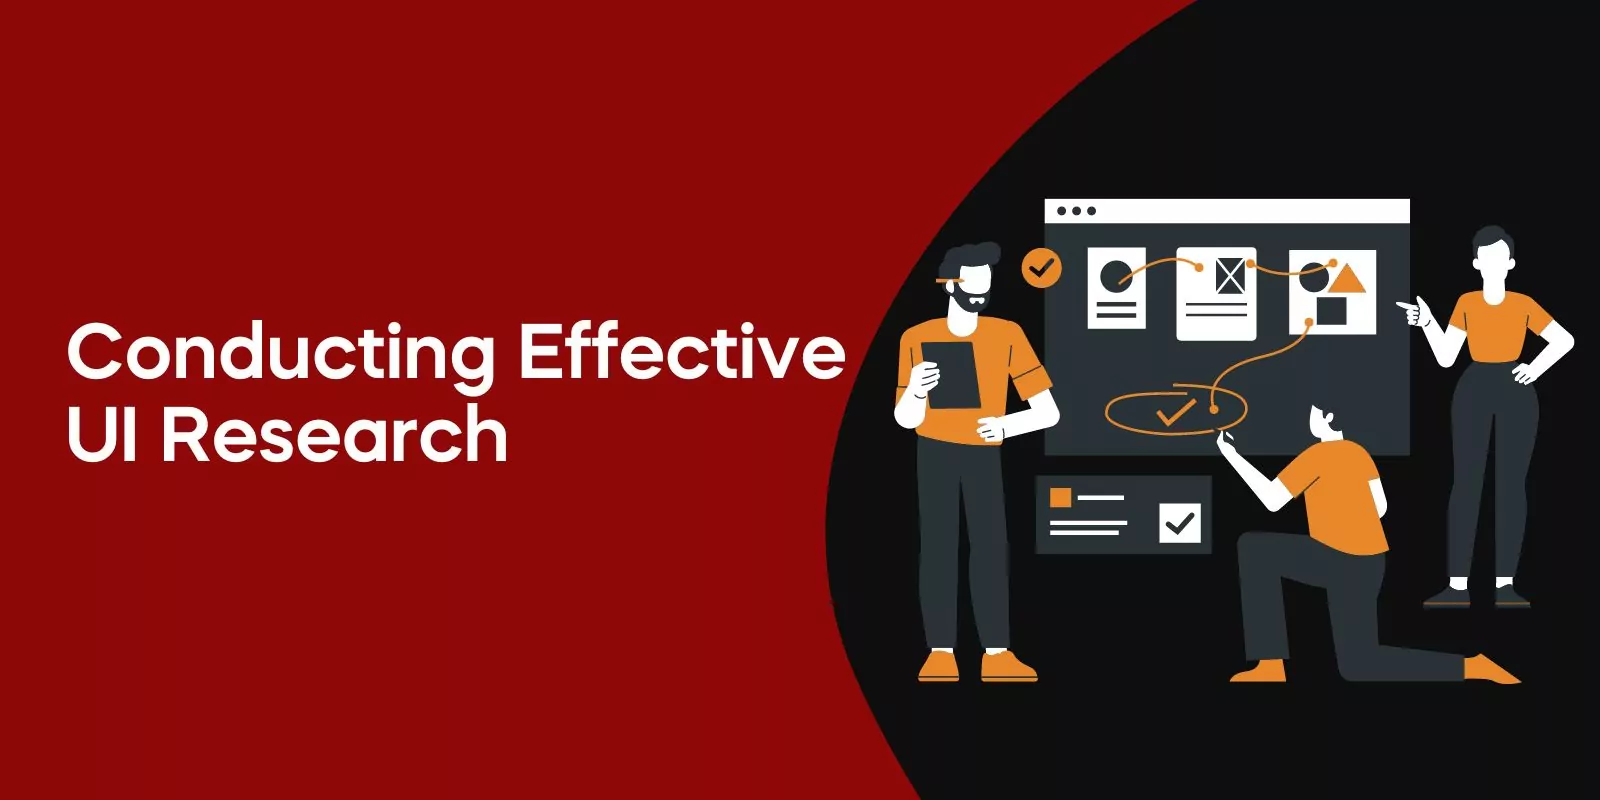 Conducting Effective UI Research